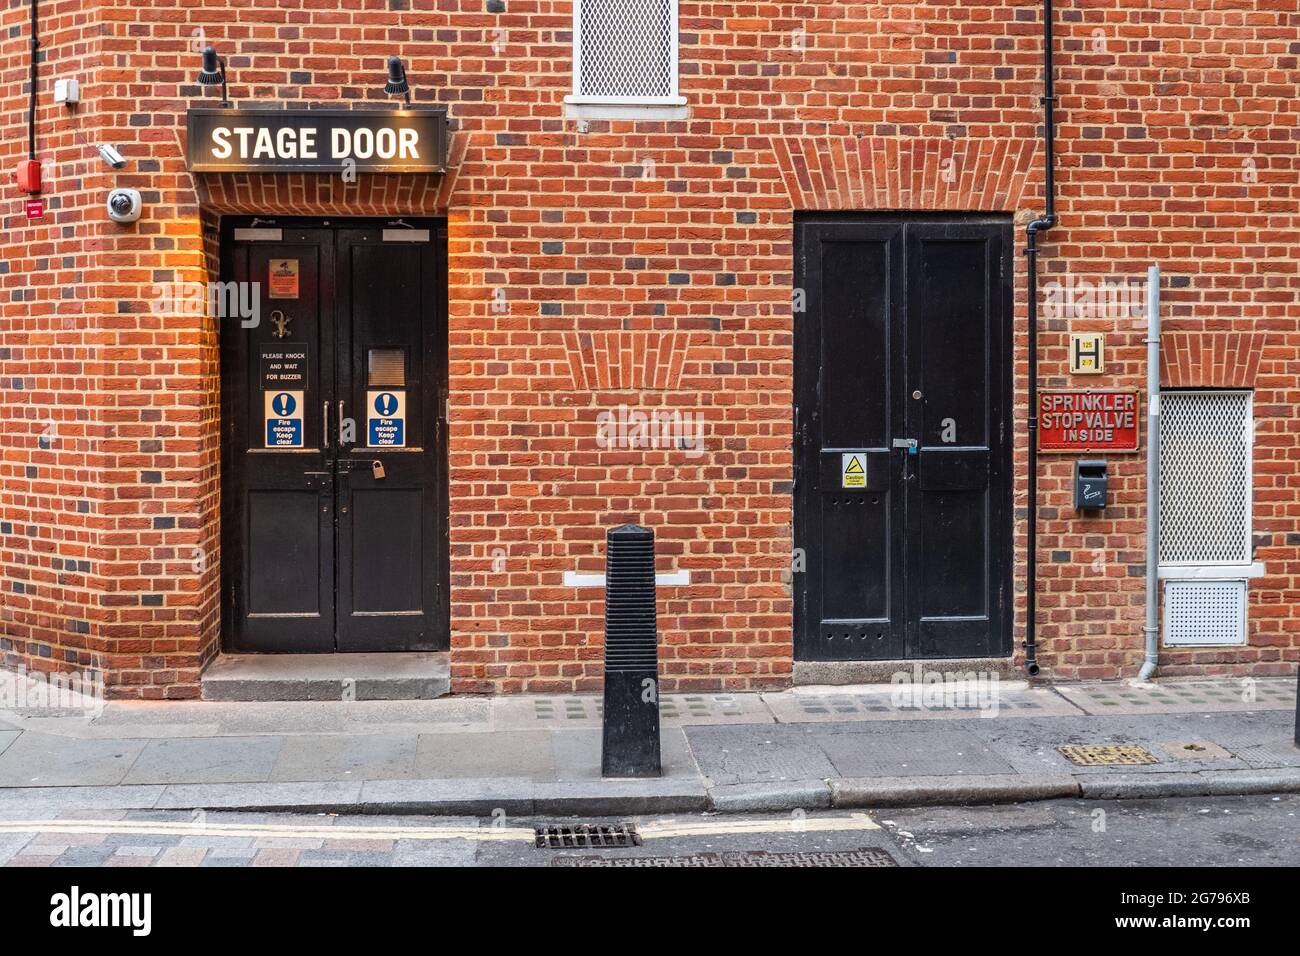 Stage Door, London. A securely closed stage door at the rear of a theatre in the heart of London's West End theater district. Stock Photo